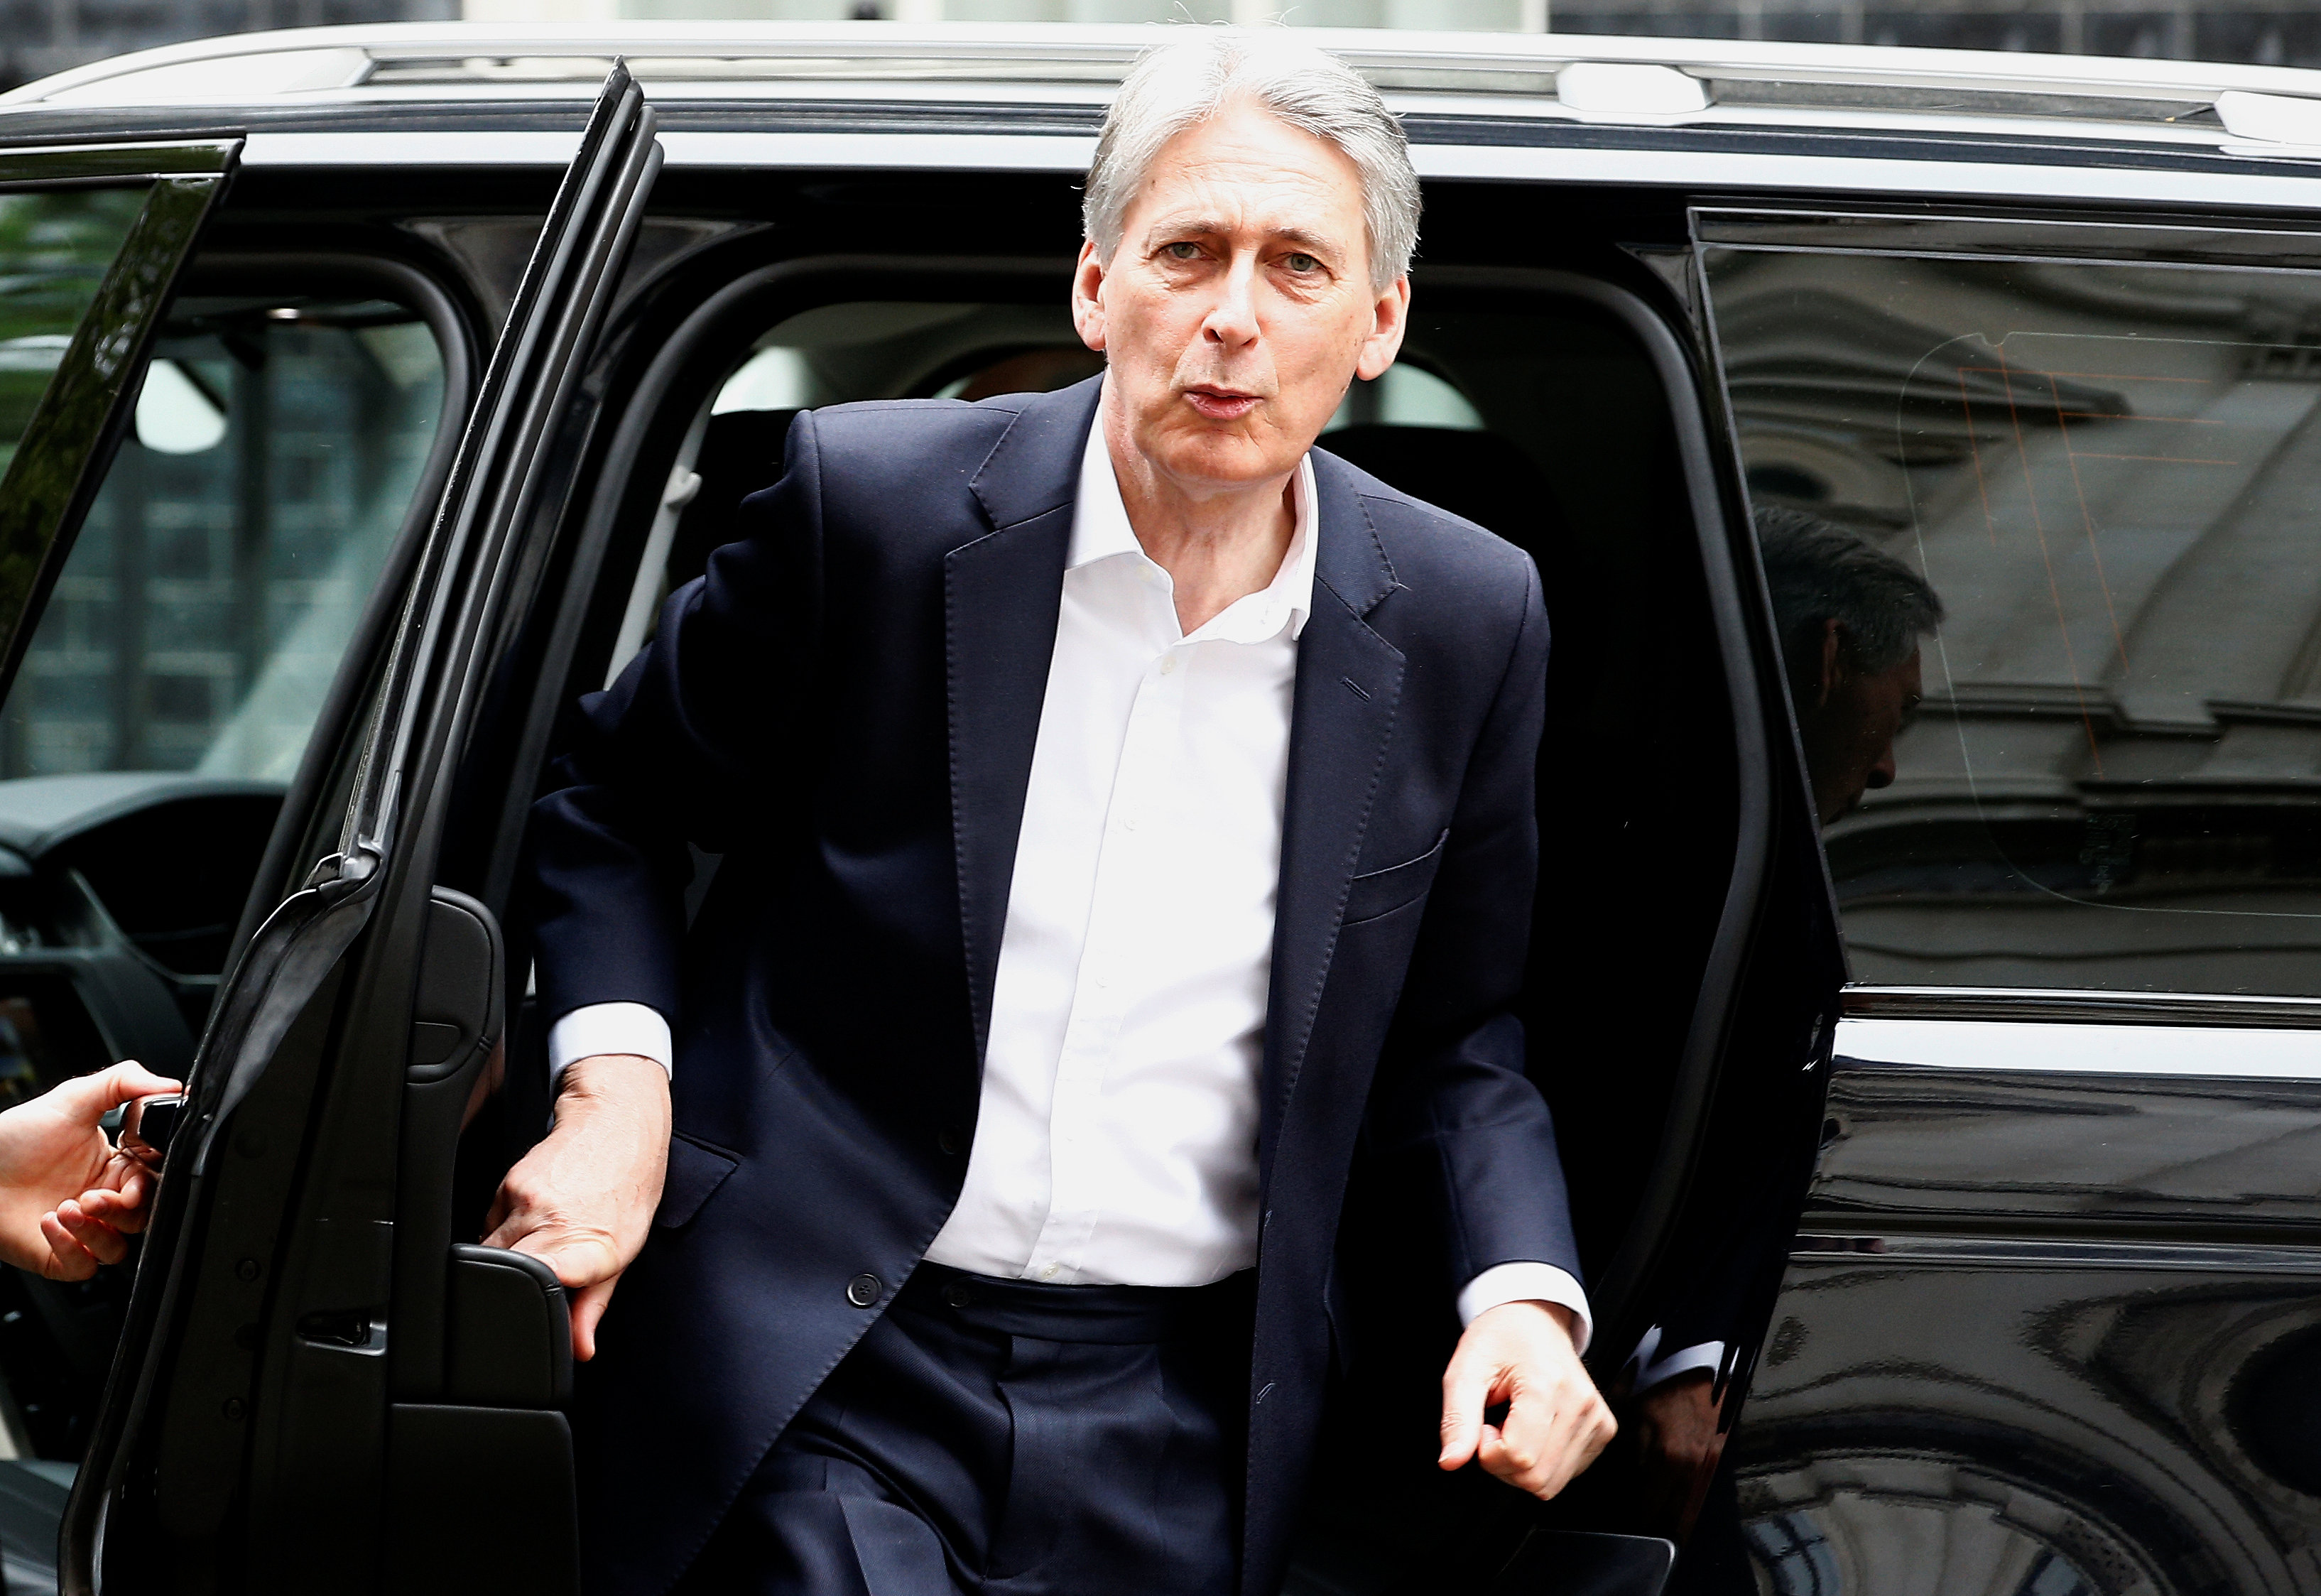 UK finance minister Hammond beats target as deficit hits 16-year low